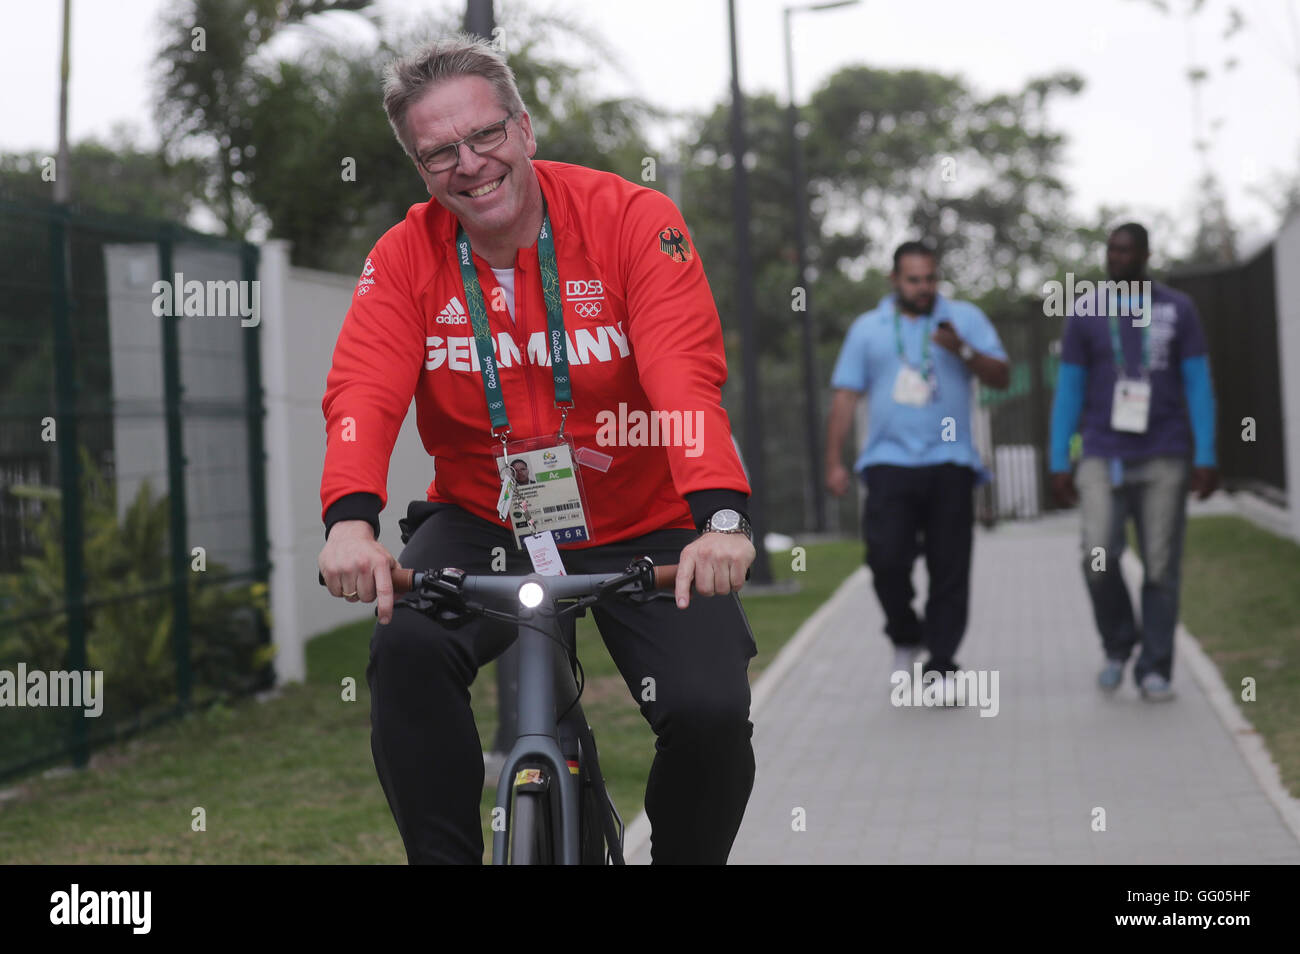 Rio de Janeiro, Brazil. 2nd Aug, 2016. Dirk Schimmelpfenning, head of competitive sports at the German Olympic Sports Association (DOSB), pedals a bicycle during the media day prior to the Rio 2016 Olympic Games in Rio de Janeiro, Brazil, 2 August 2016. The Rio 2016 Olympic Games take place from 05 to 21 August. Photo: Michael Kappeler/dpa/Alamy Live News Stock Photo